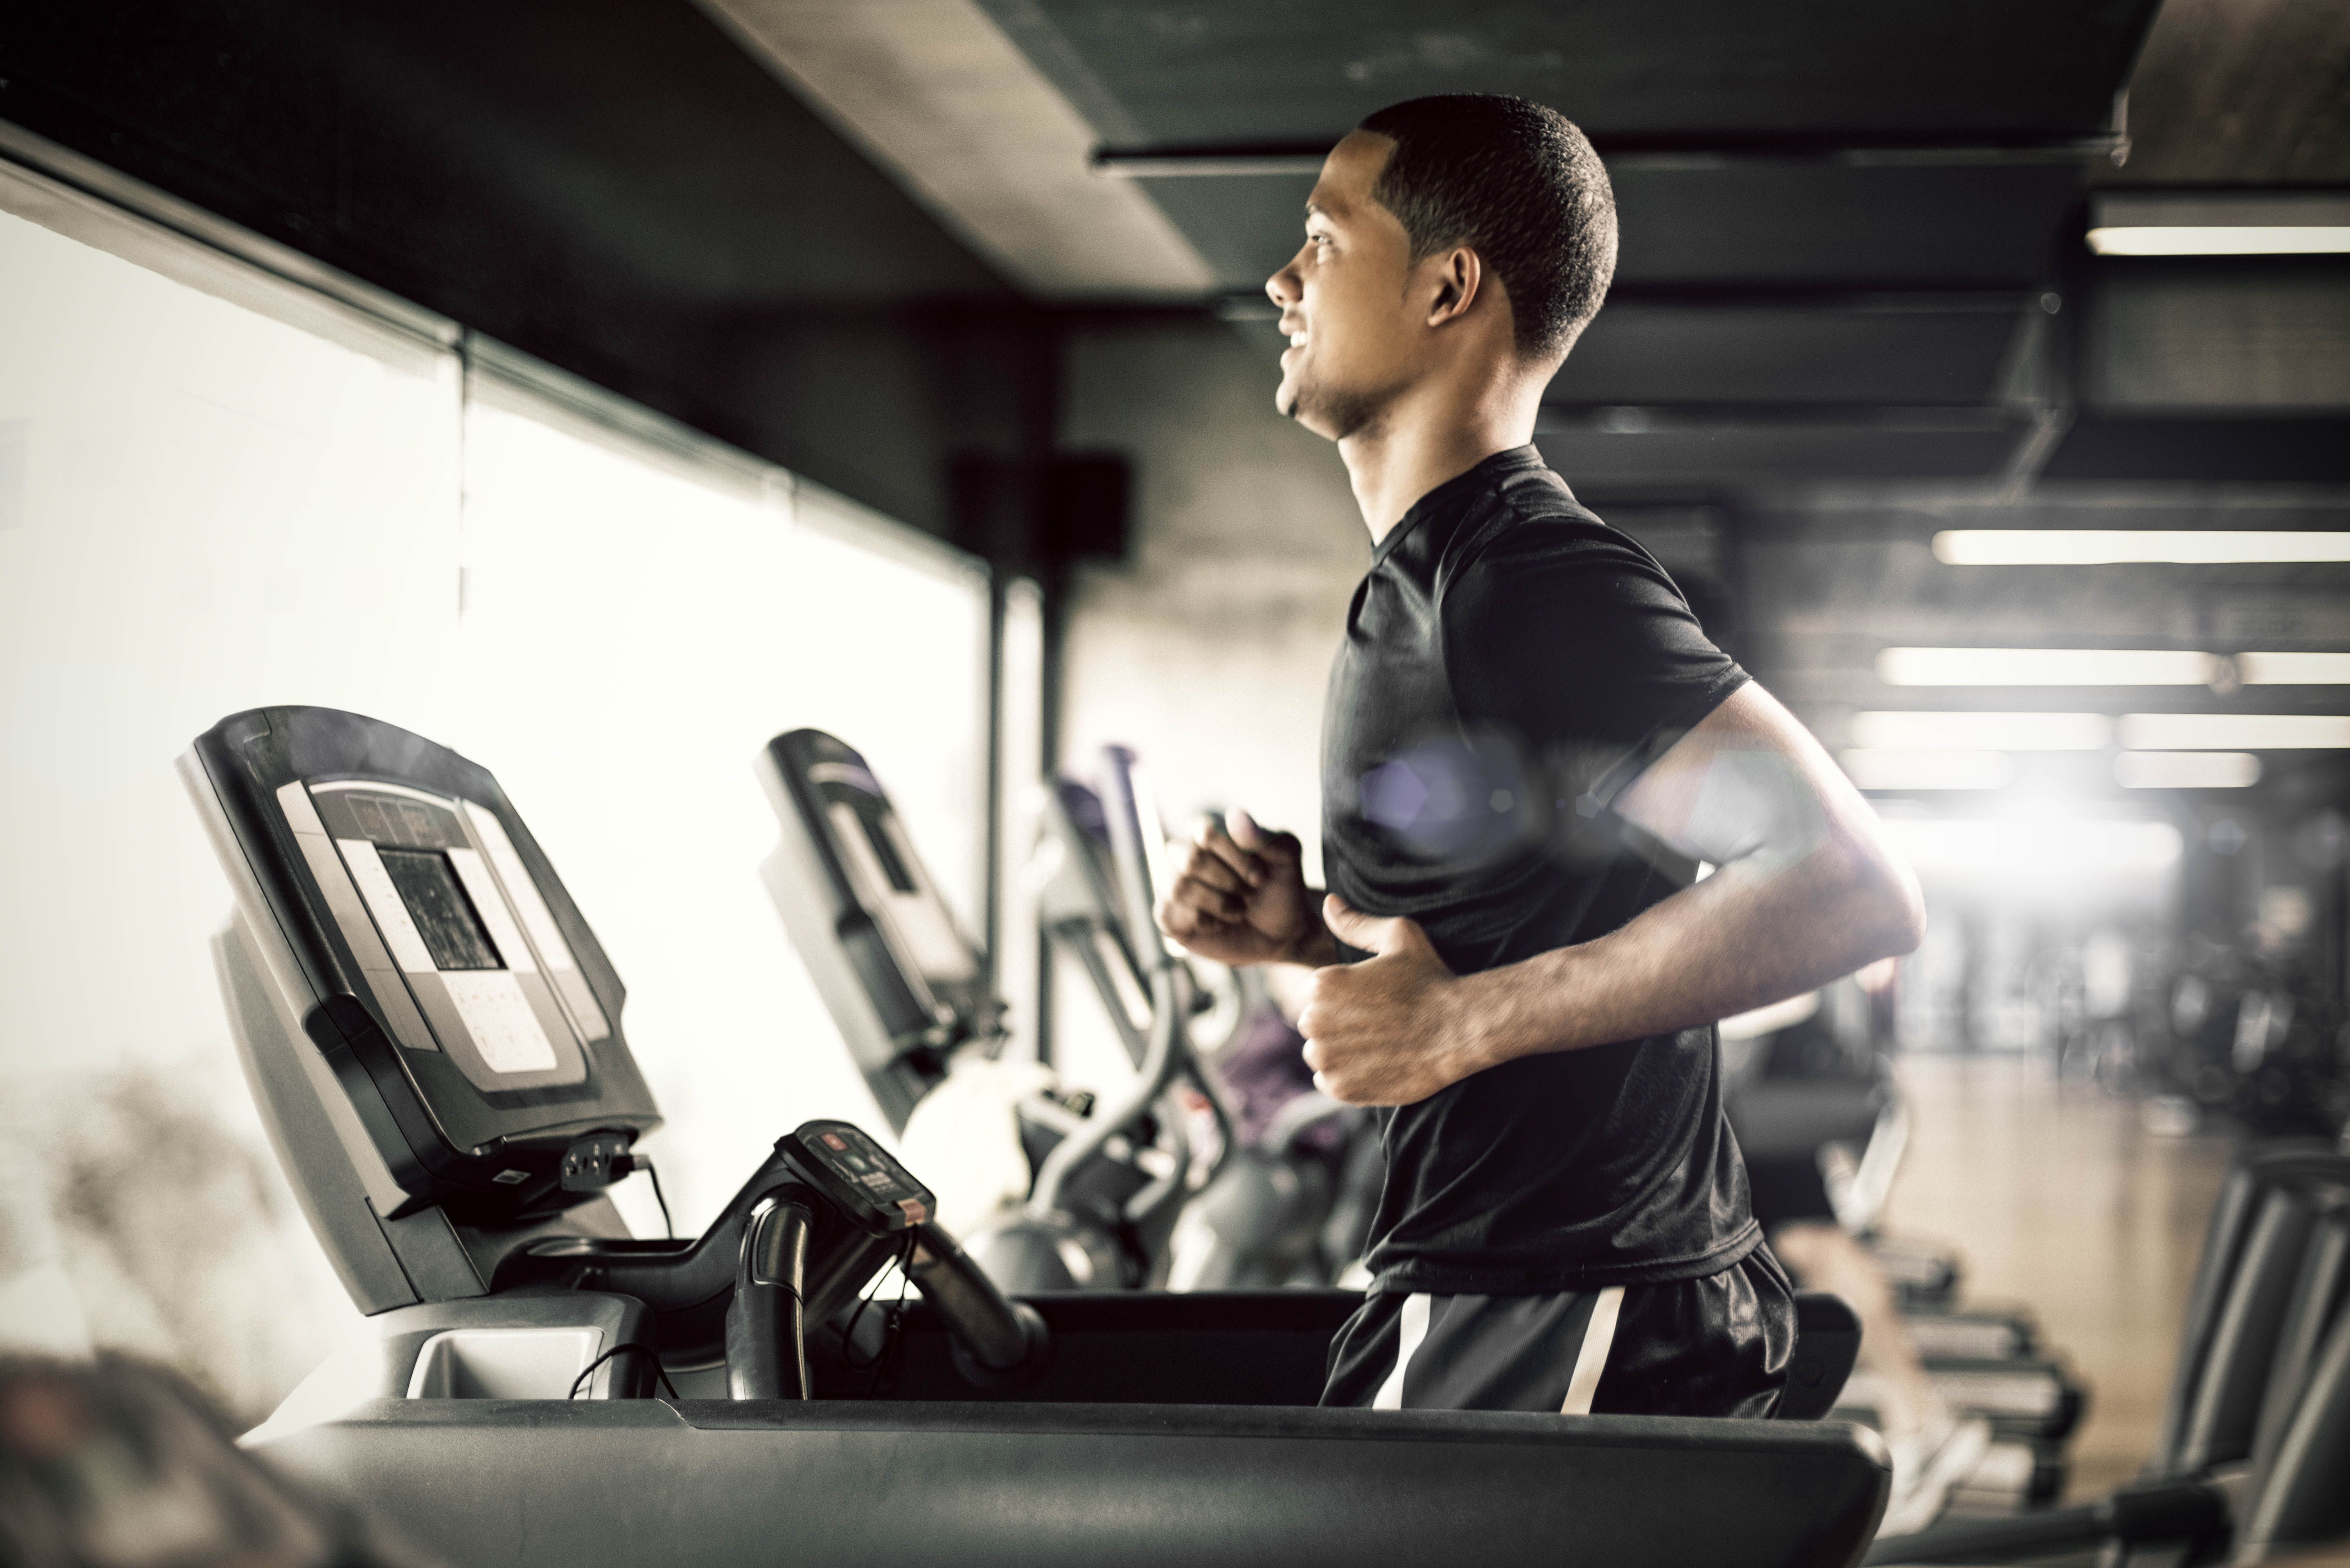 Treadmill Benefits - Why You Should Love Running Indoors